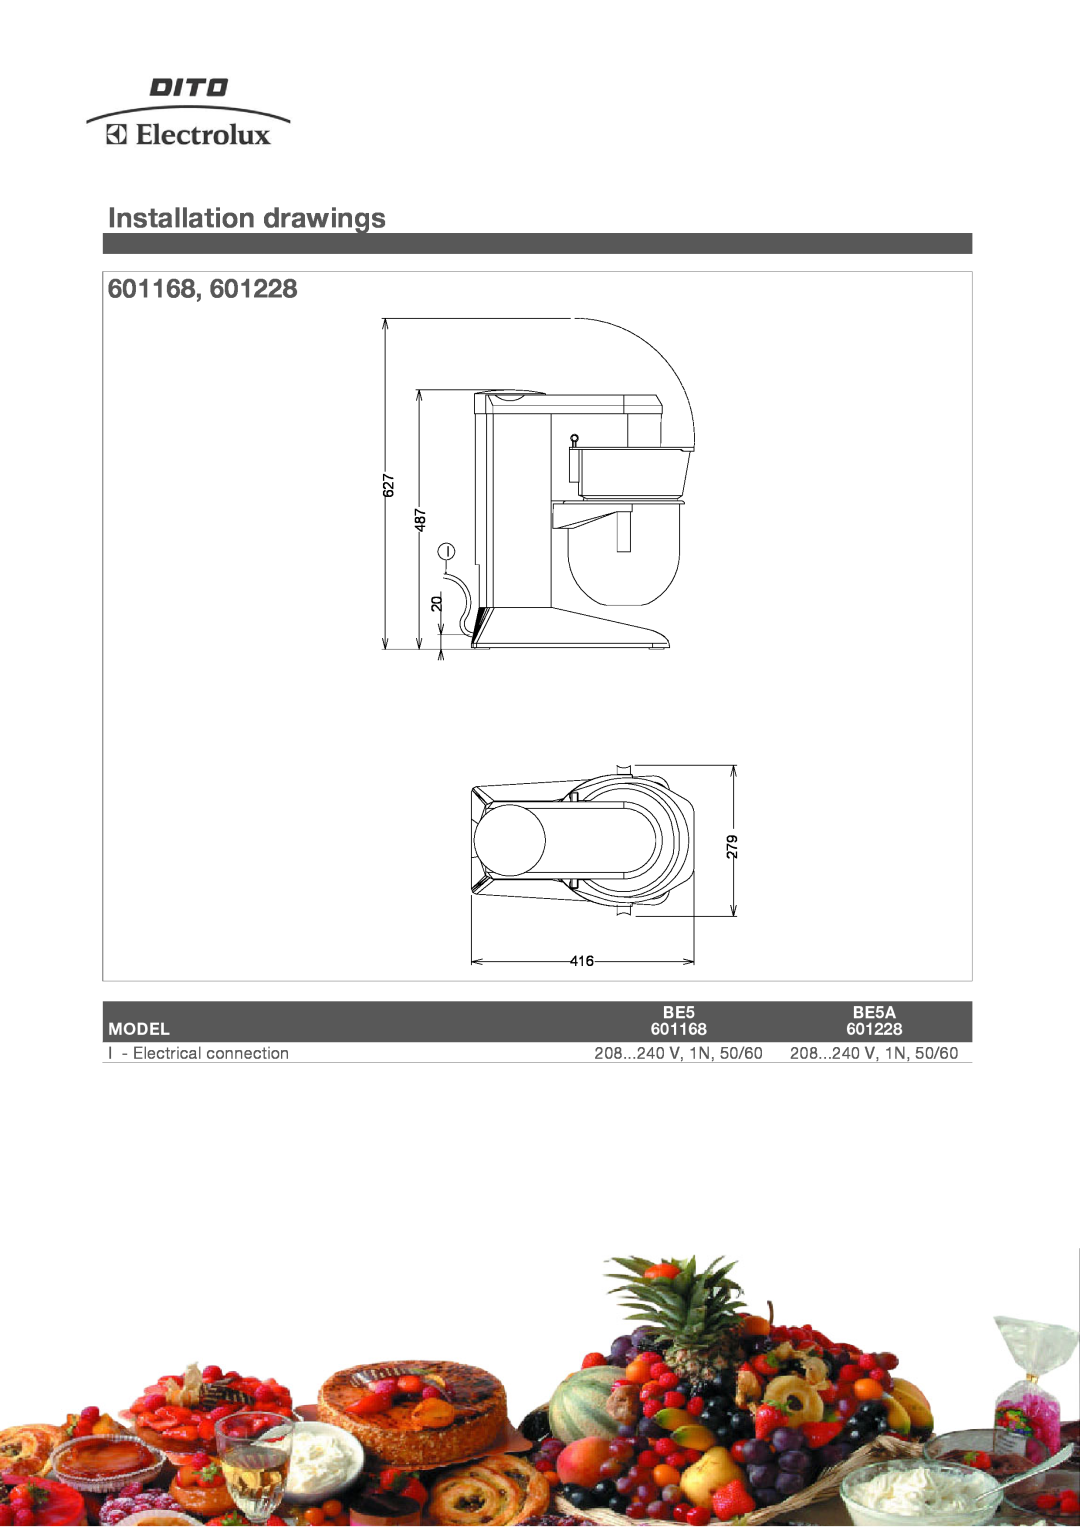 Electrolux BE5A manual Installation drawings, 601168, Model, 601228, I - Electrical connection, 208...240 V, 1N, 50/60 